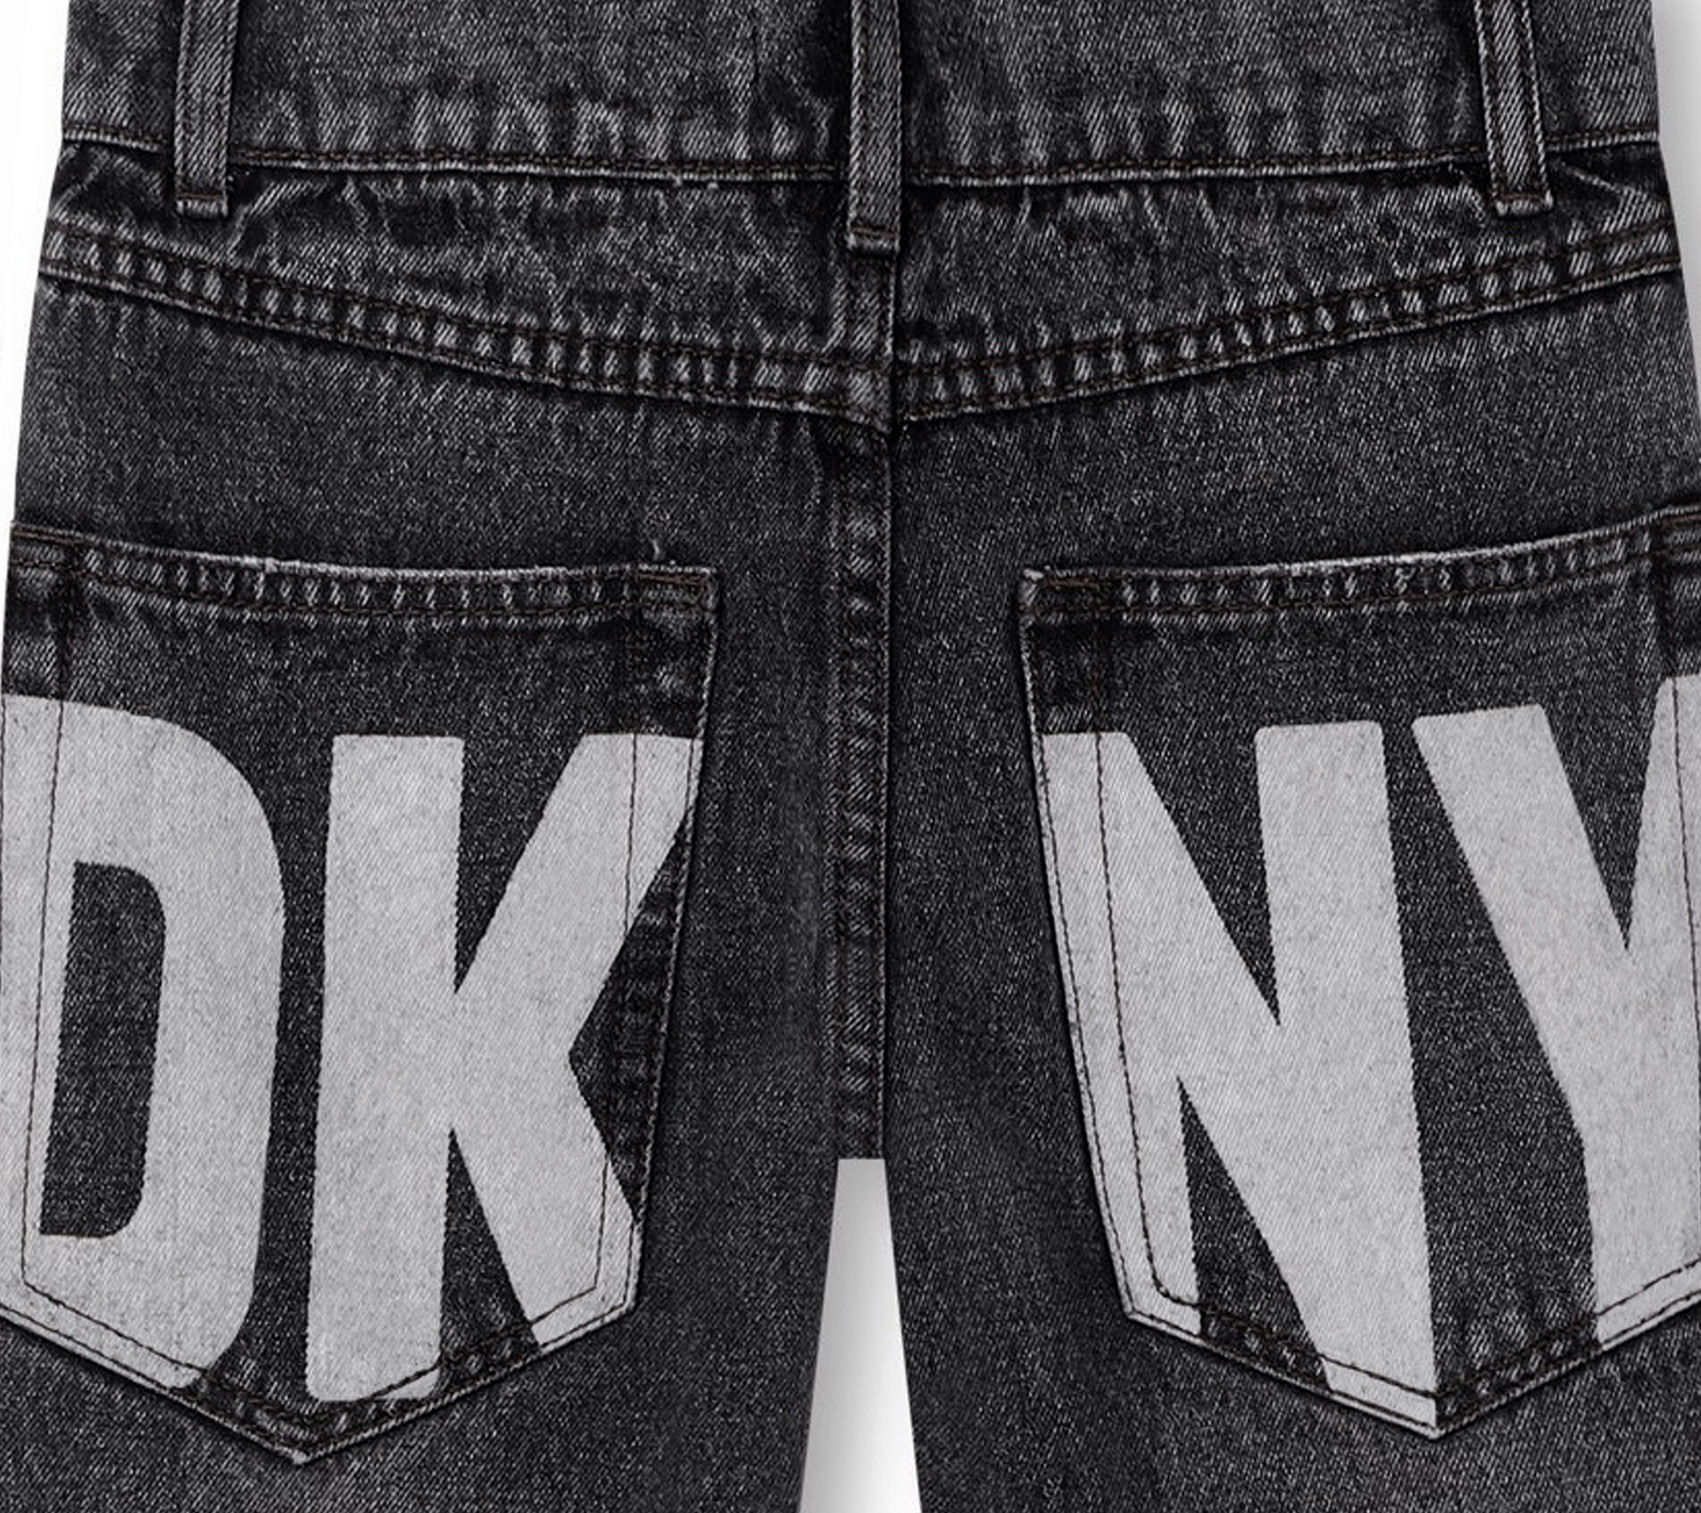 Jeans DKNY for UNISEX